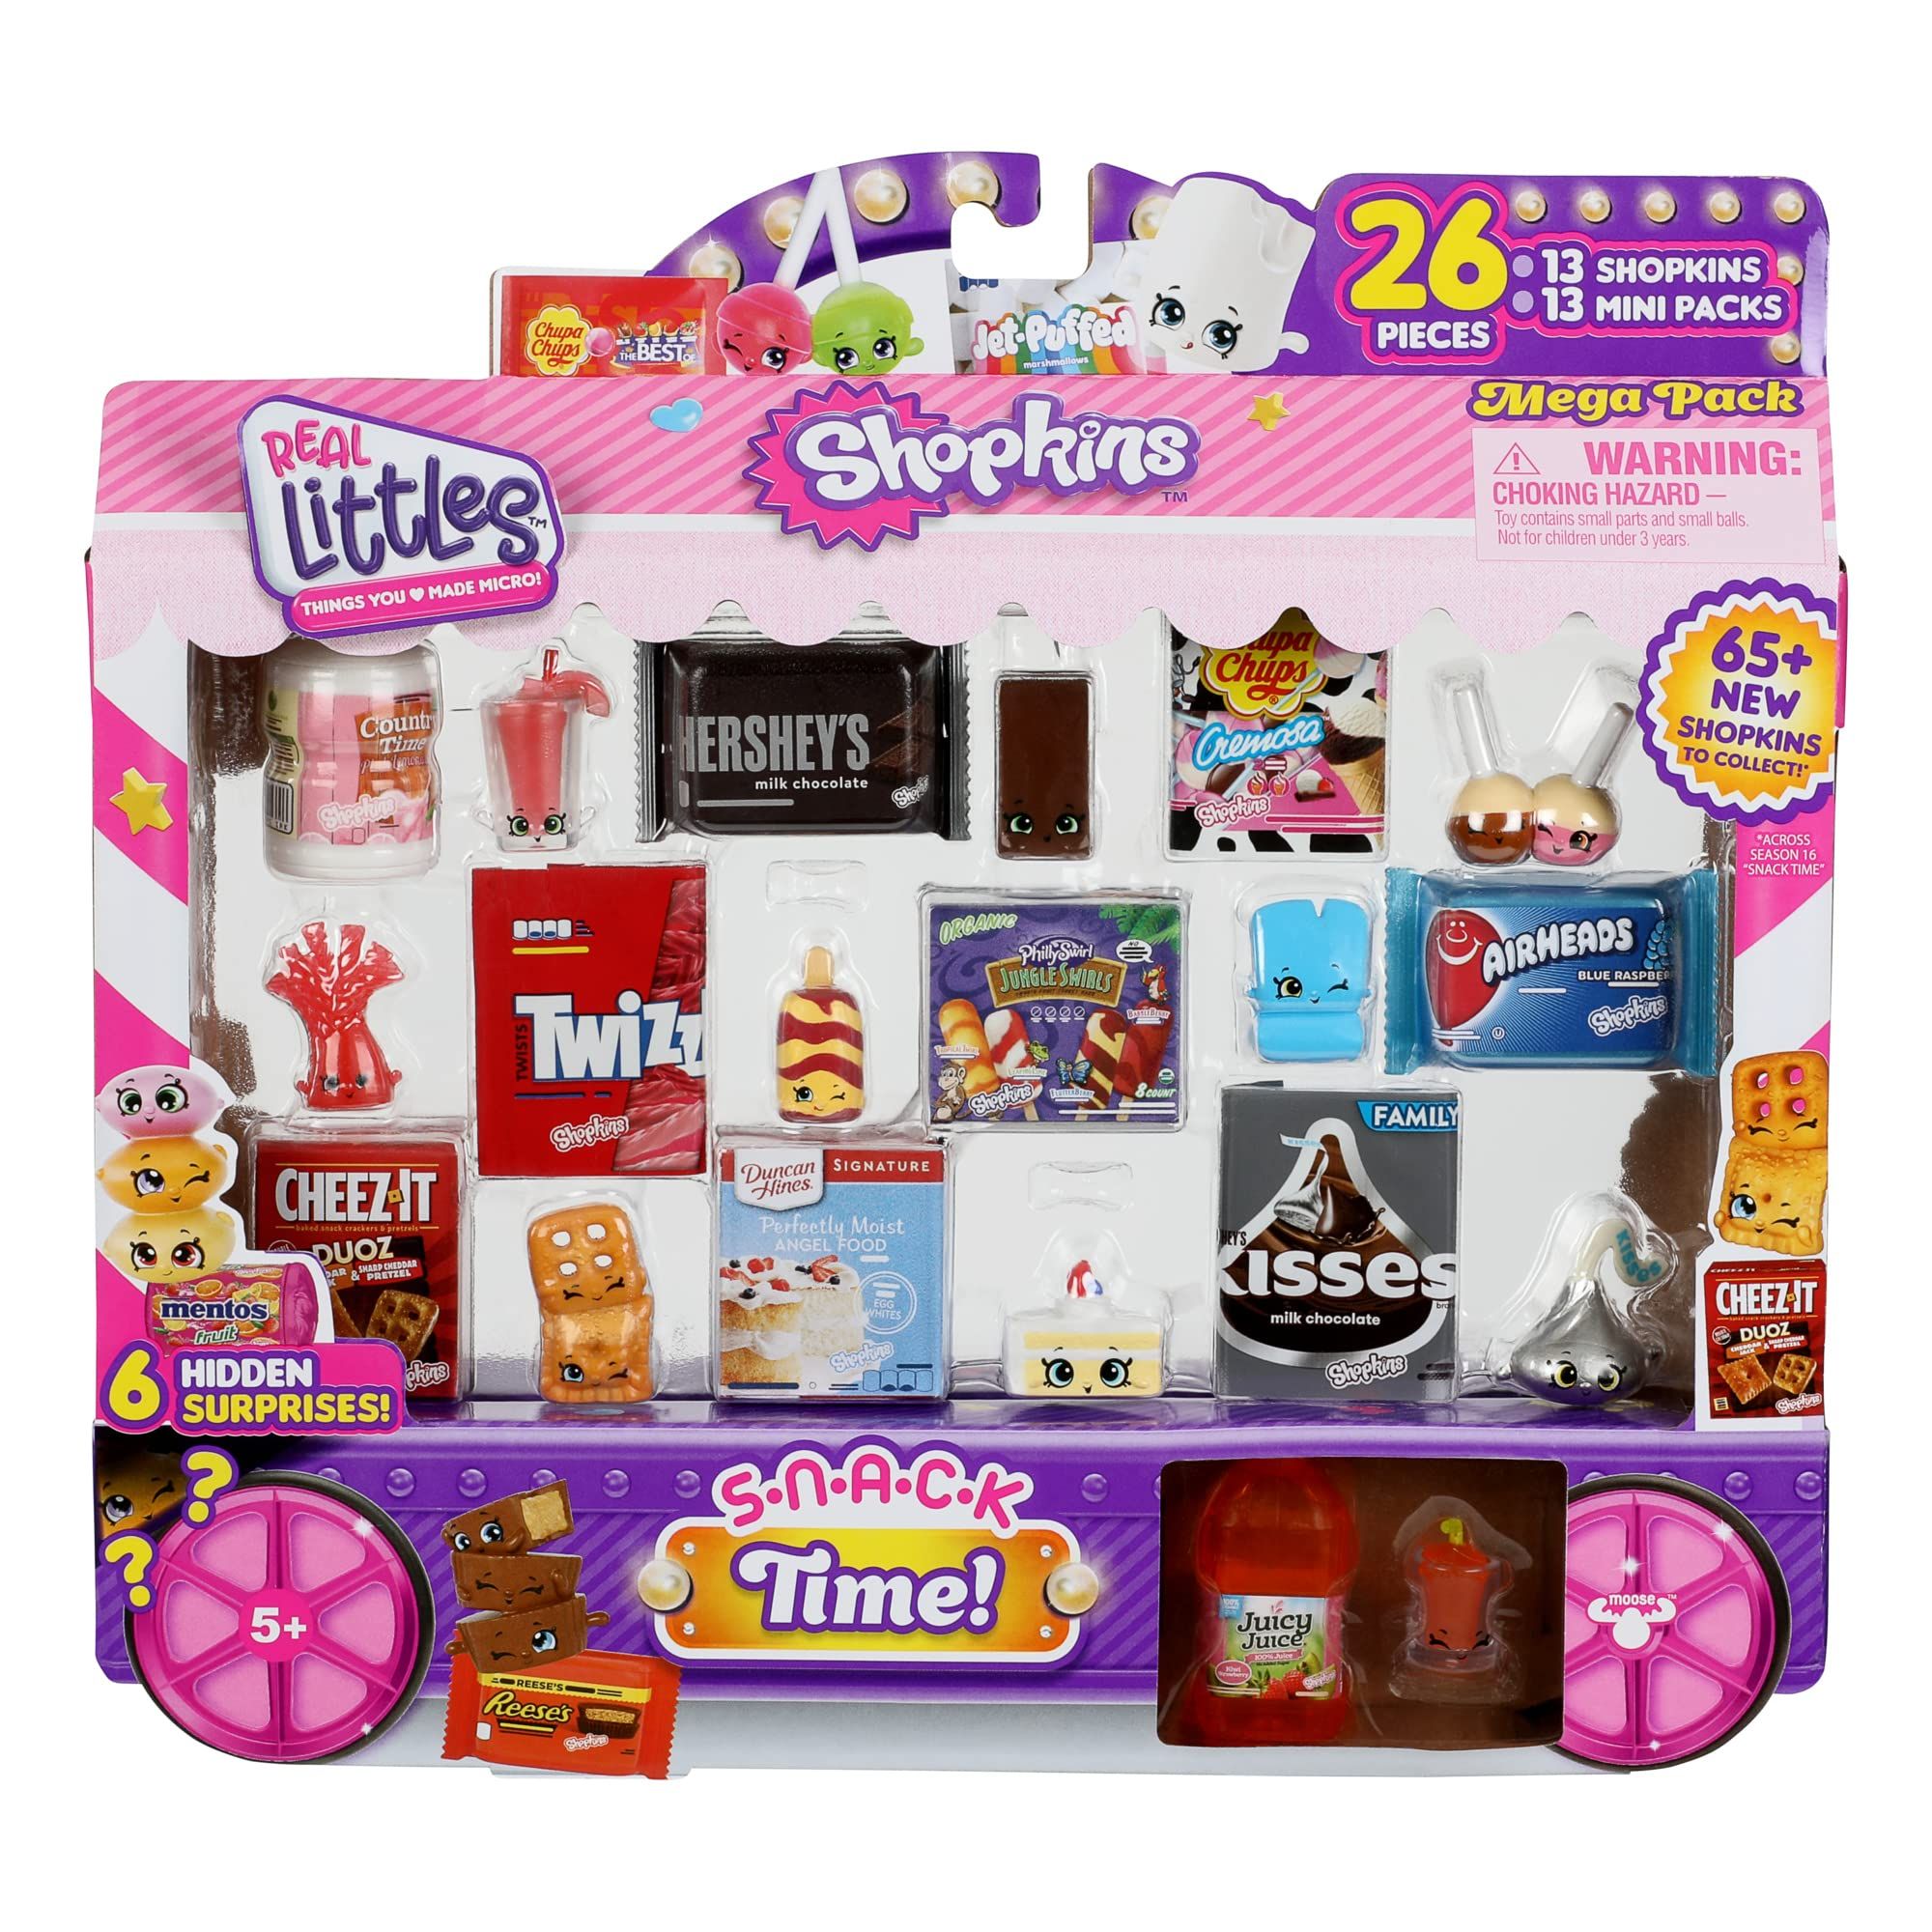 Looking to Buy Shopkins Sets. These 10 Tips Will Help You Find the Best Deals